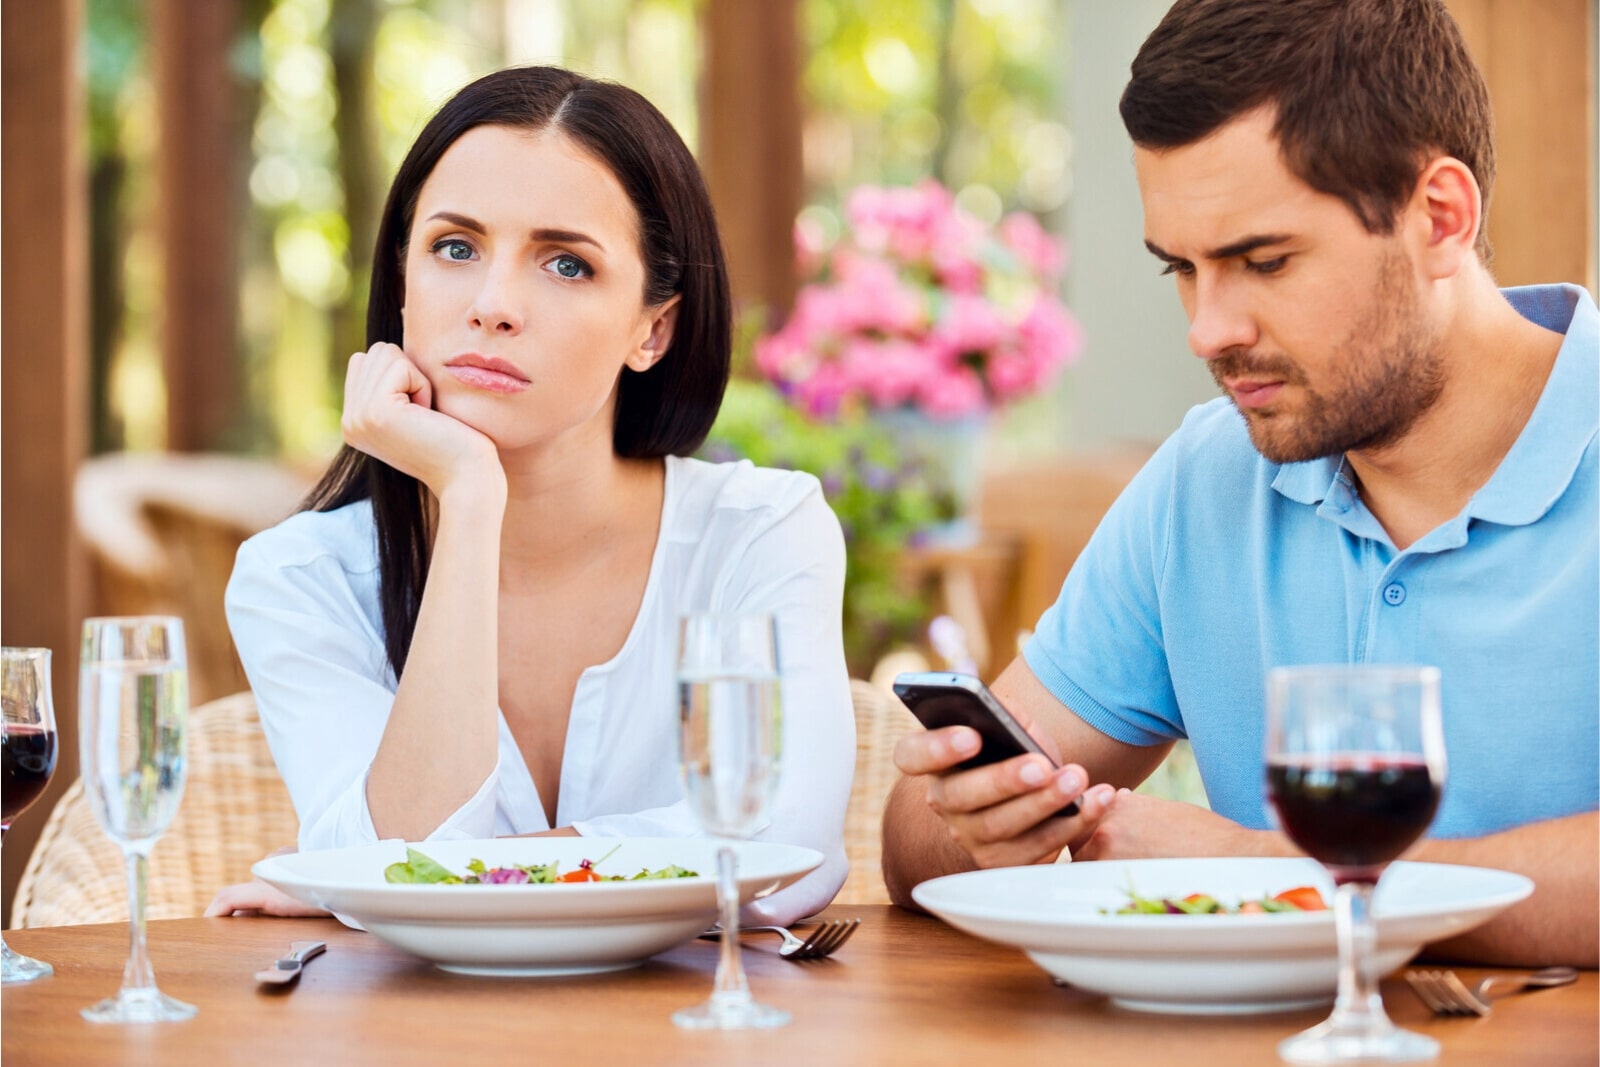 man distracted by his phone while his date looks on unimpressed